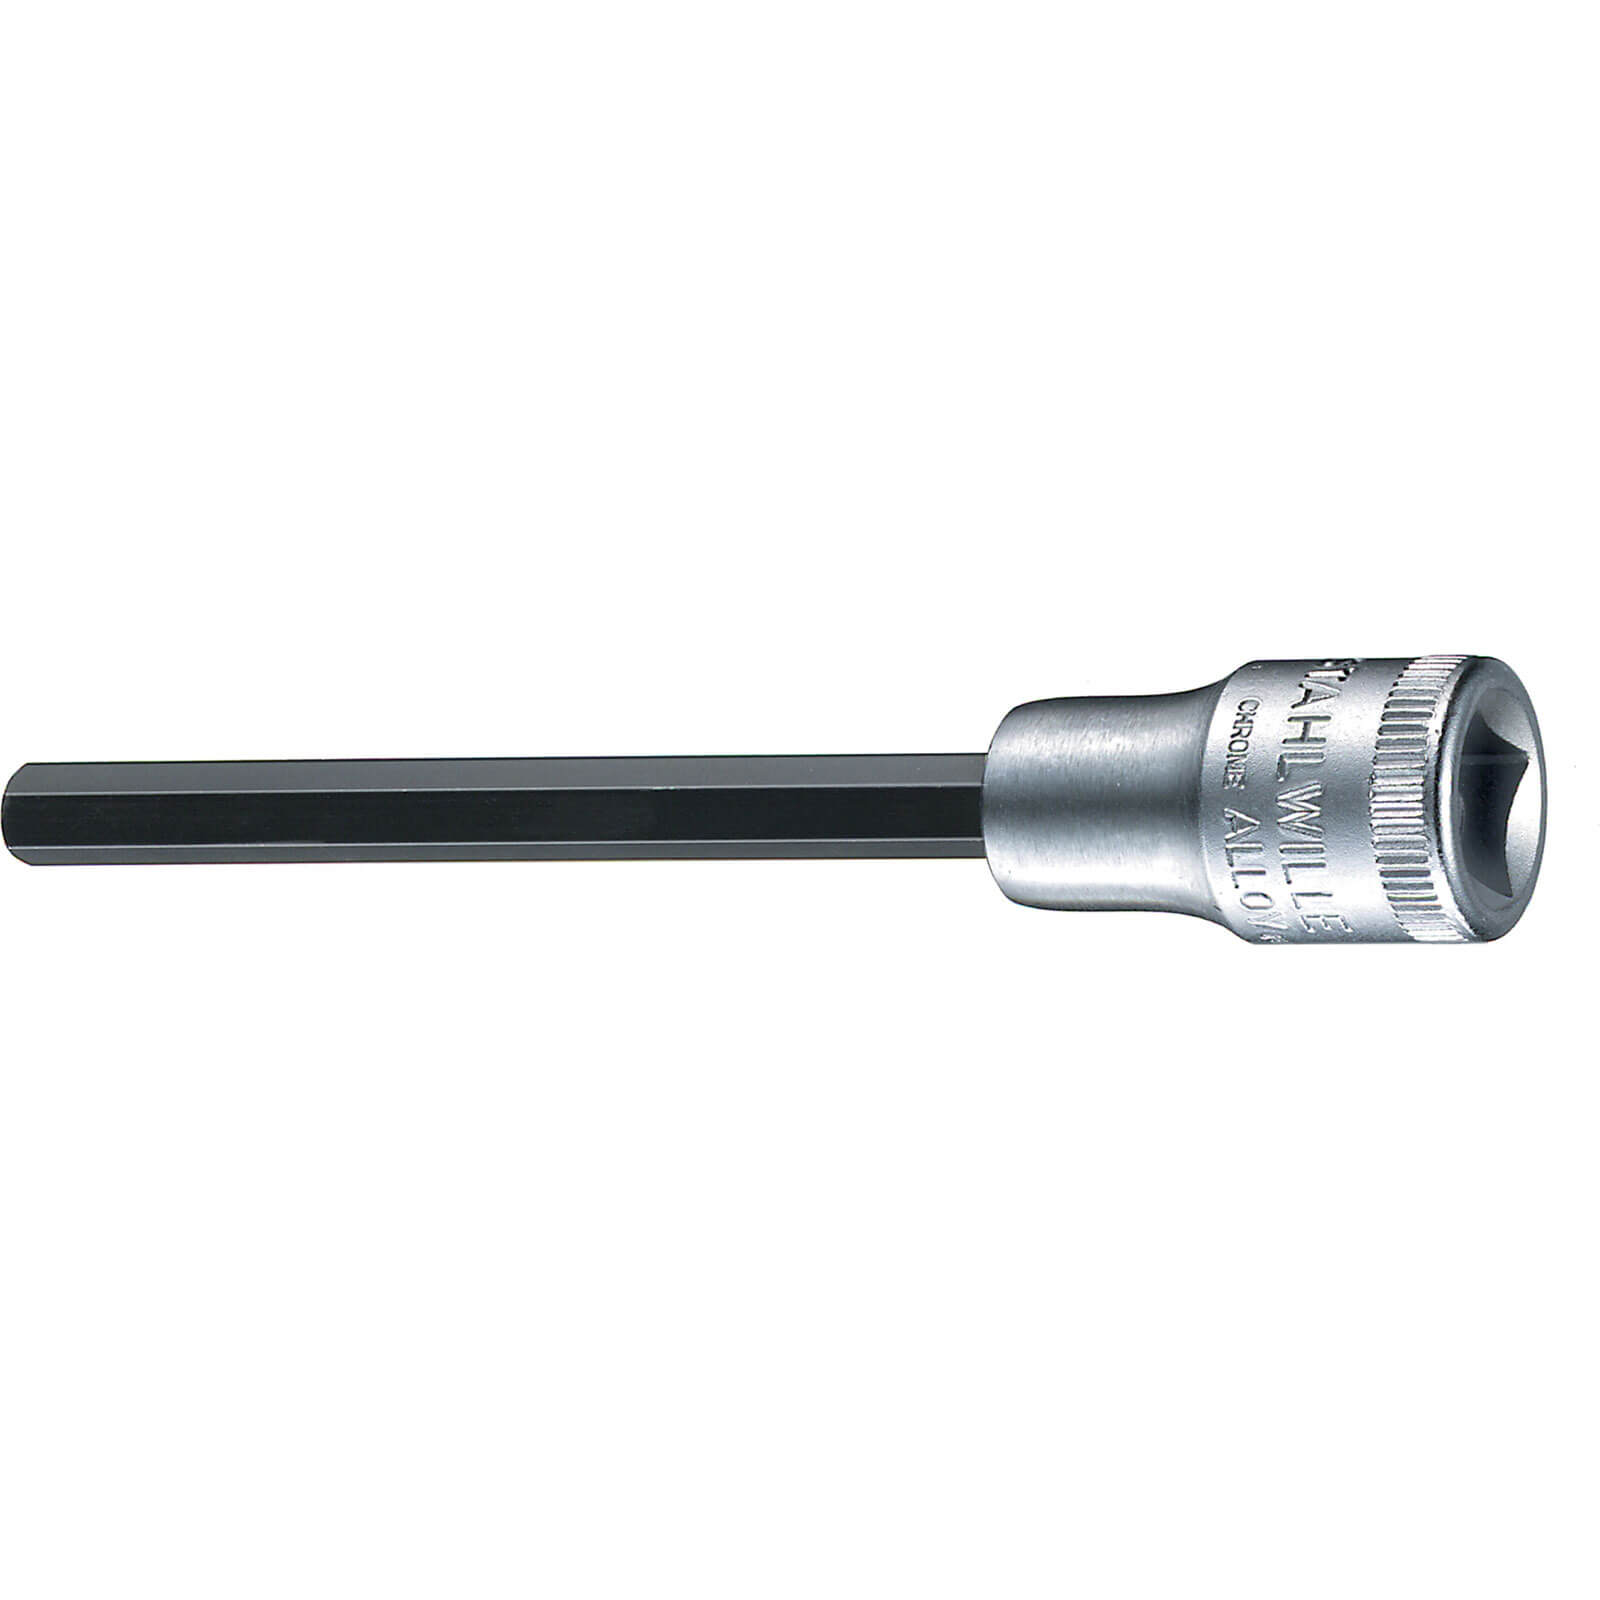 Image of Stahlwille 3/8" Drive Extra Long Hexagon Socket Bit 3/8" 6mm